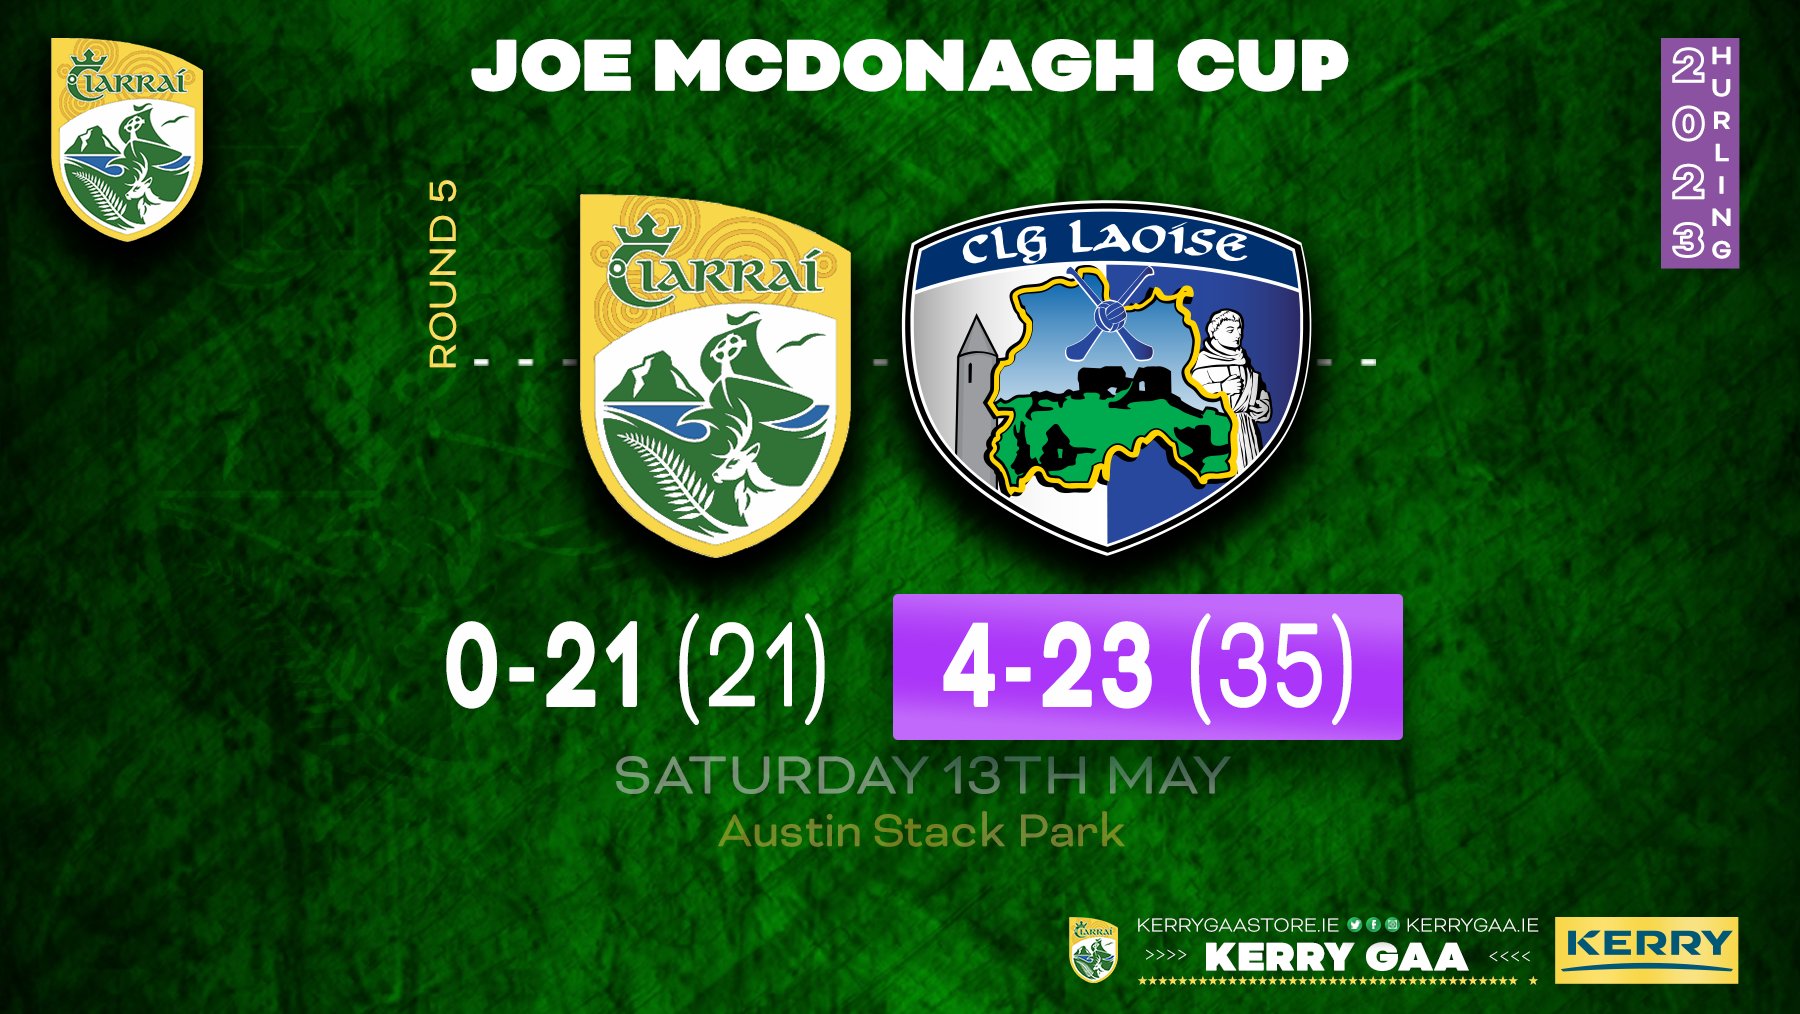 Final round defeat for Kerry in Joe McDonagh